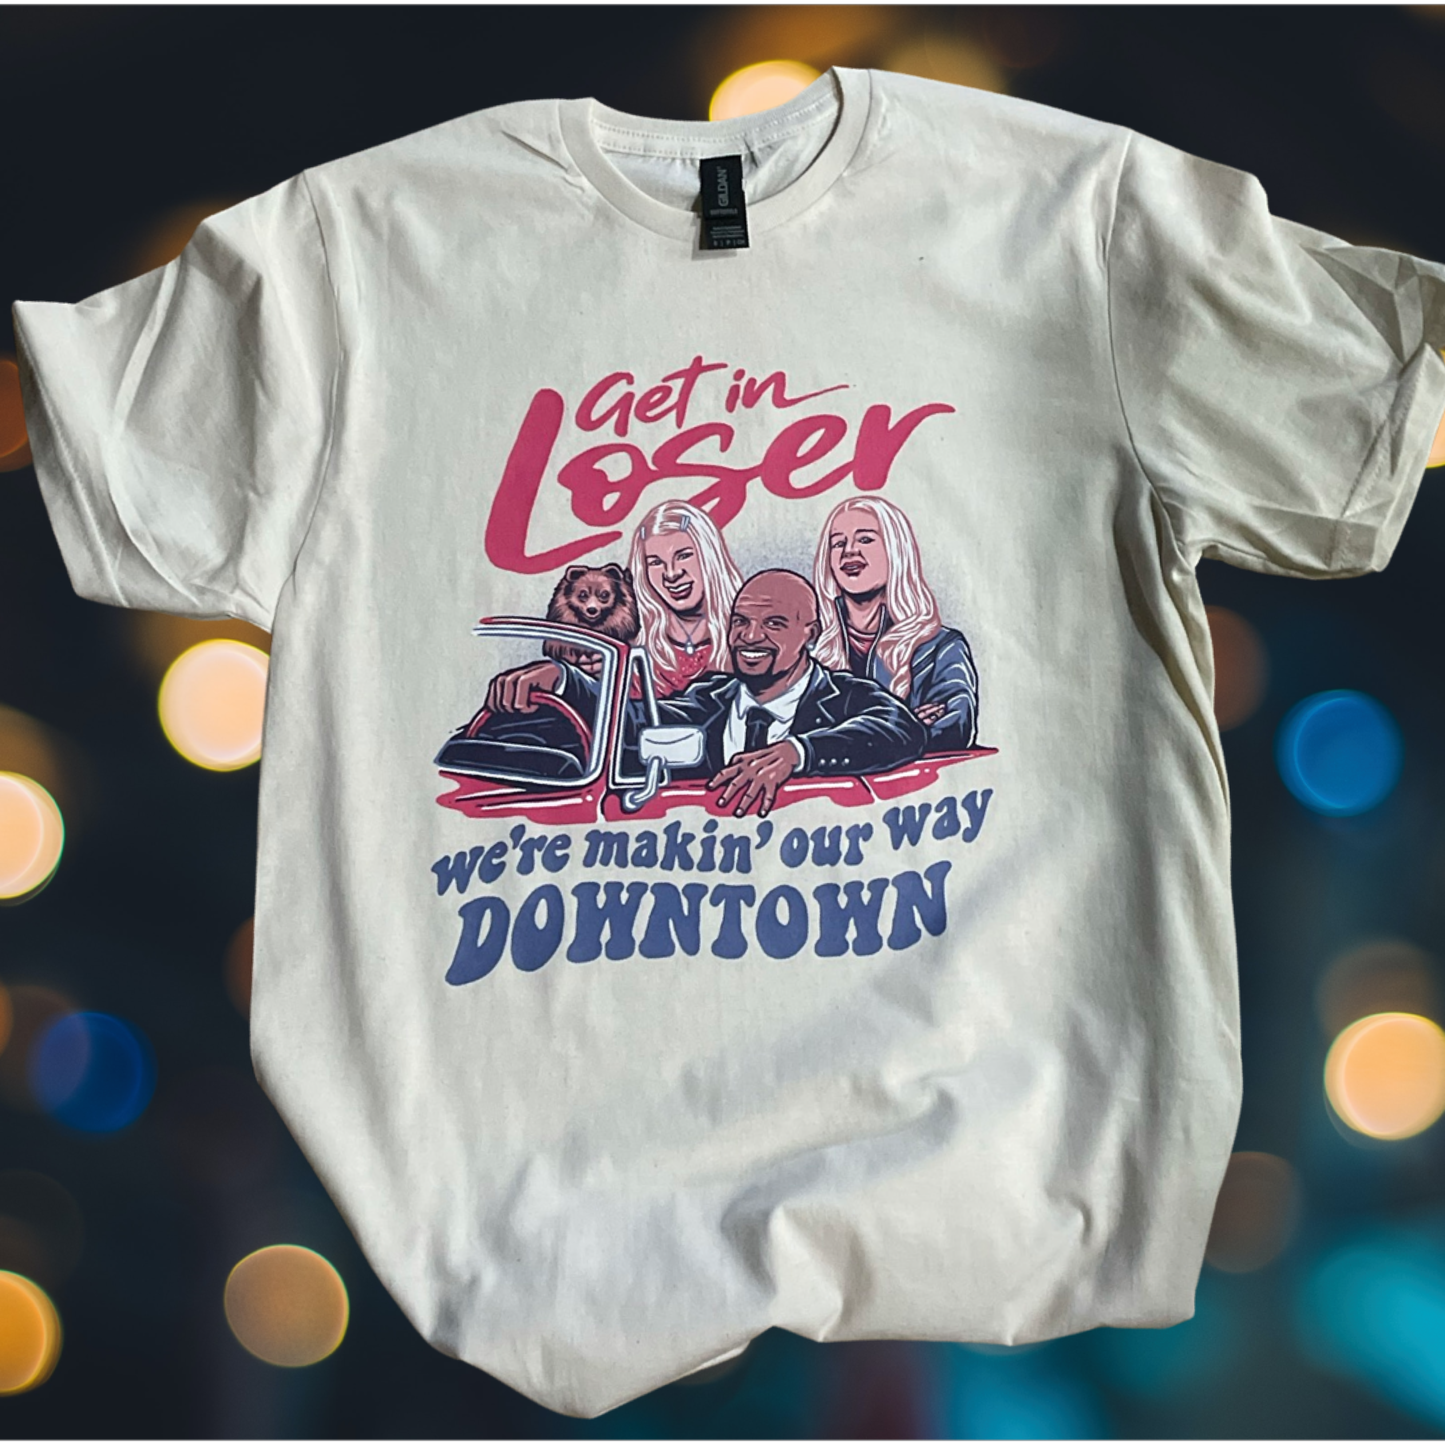 Making our way downtown shirt